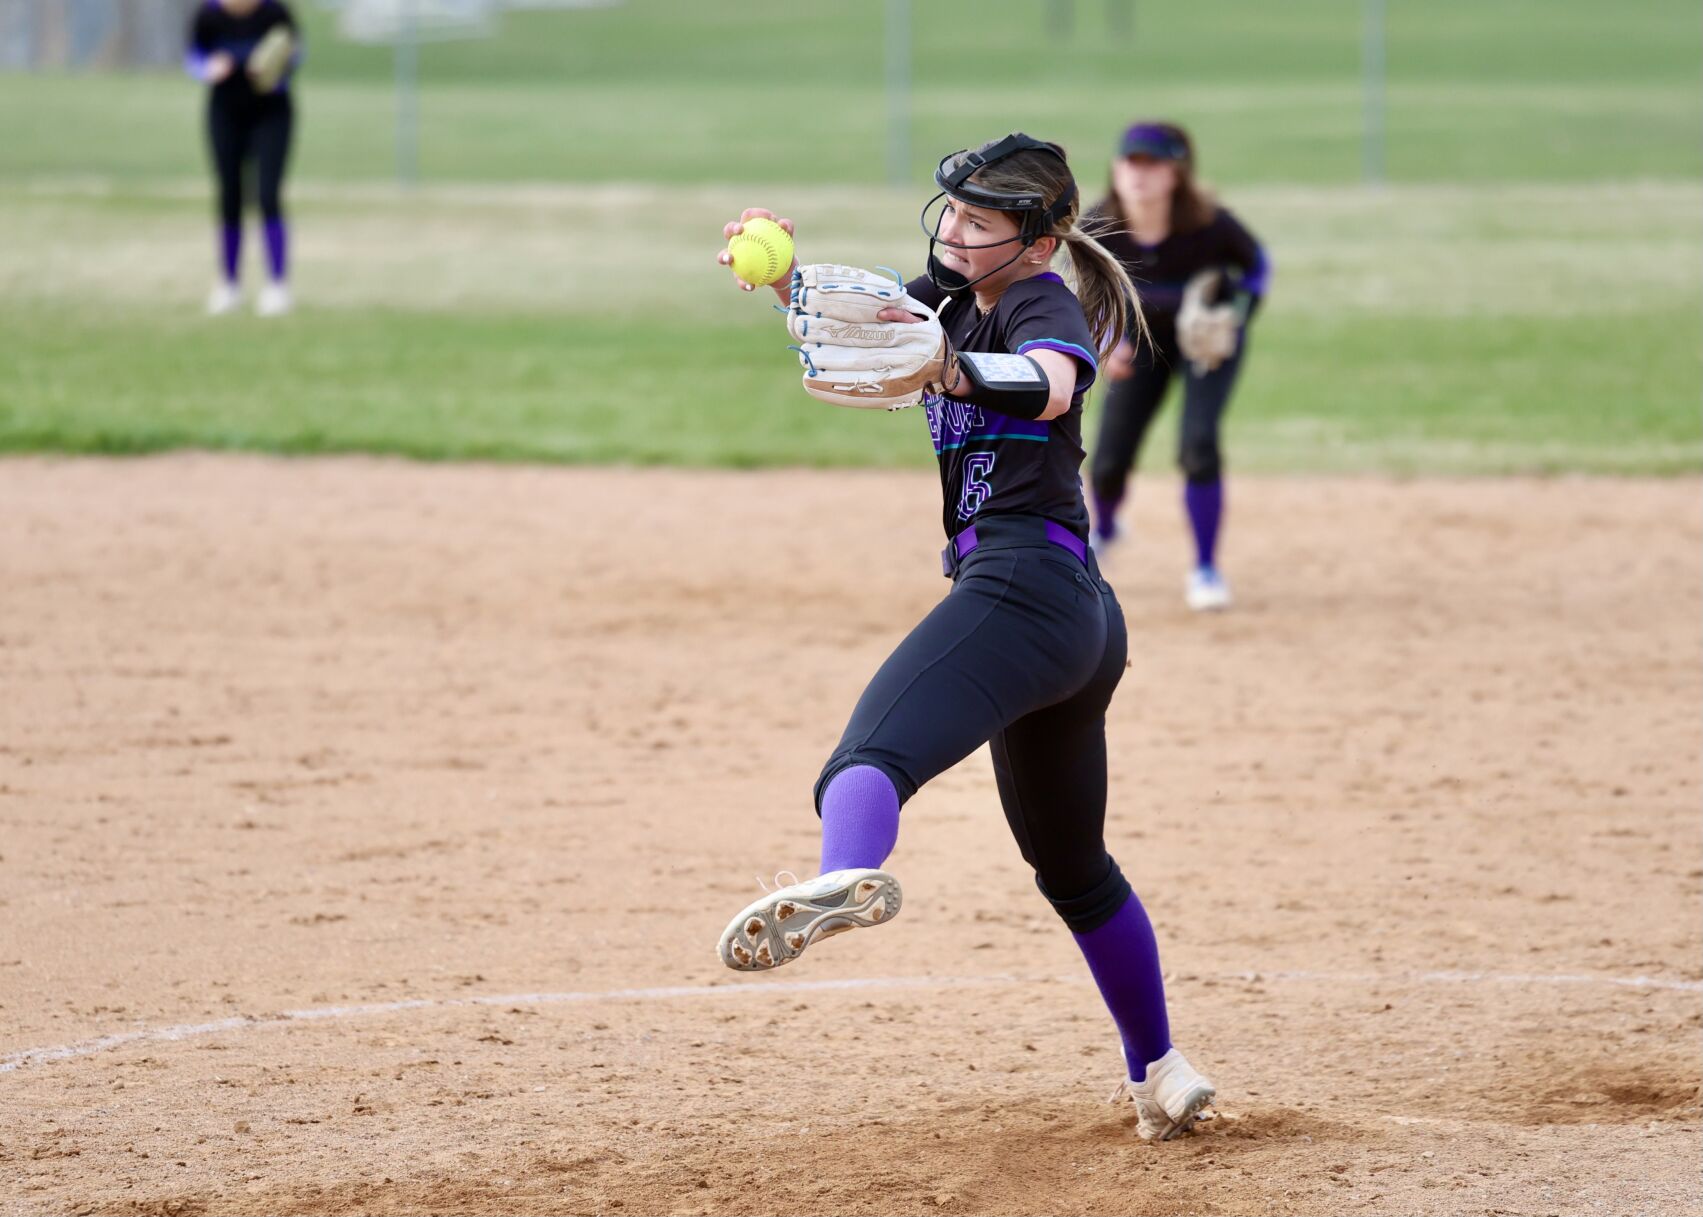 Century Softball Team Shines in Doubleheader Sweep of Minico with Stellar Performances